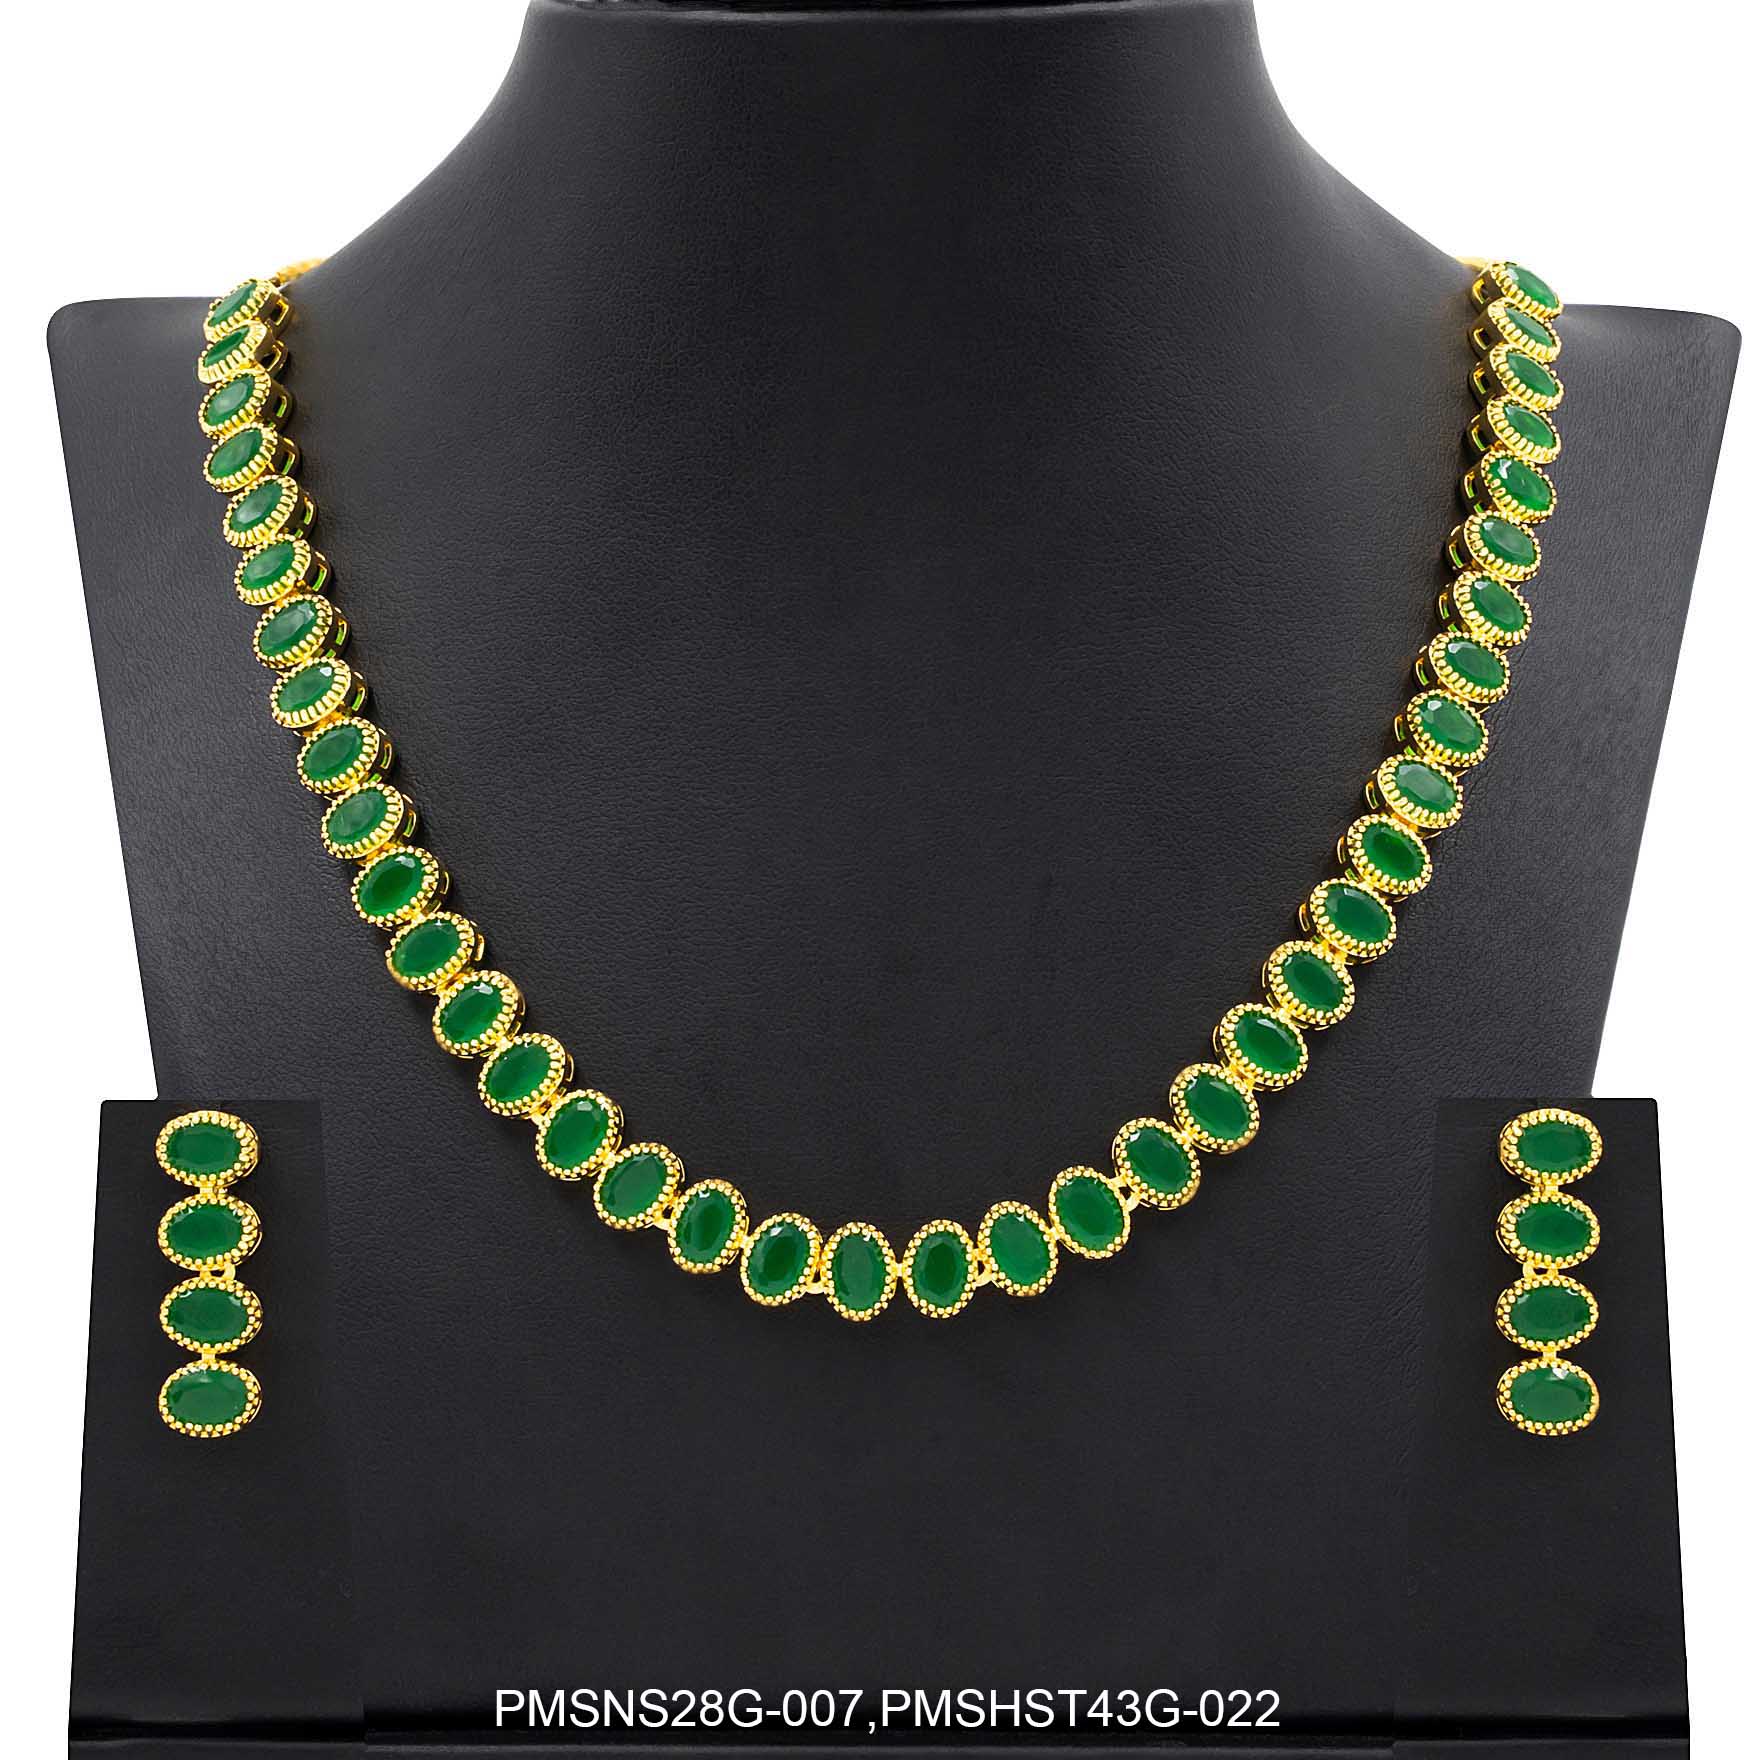 Stone Necklace with Stud  PMSNS28G-007,PMSHST43G-022